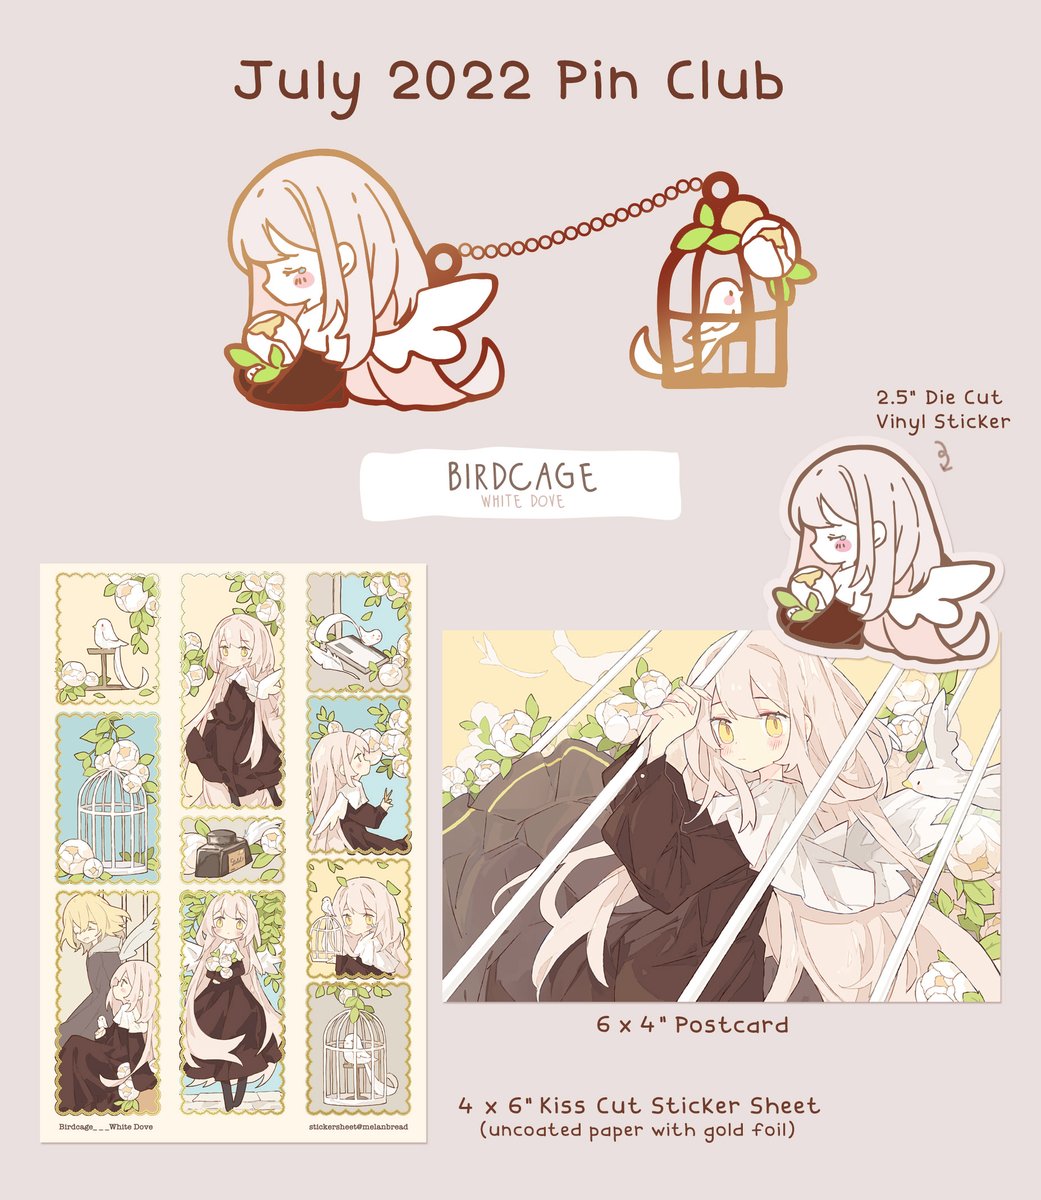 July's Patreon theme is "Birdcage - White Dove" featuring my original character trapped in an isolated world. 
This month's merch will be a special pin set, postcard, sticker sheet w/ gold foil accents, and vinyl sticker. Pledge during the month of July to get these shipped.⁣⁣ 